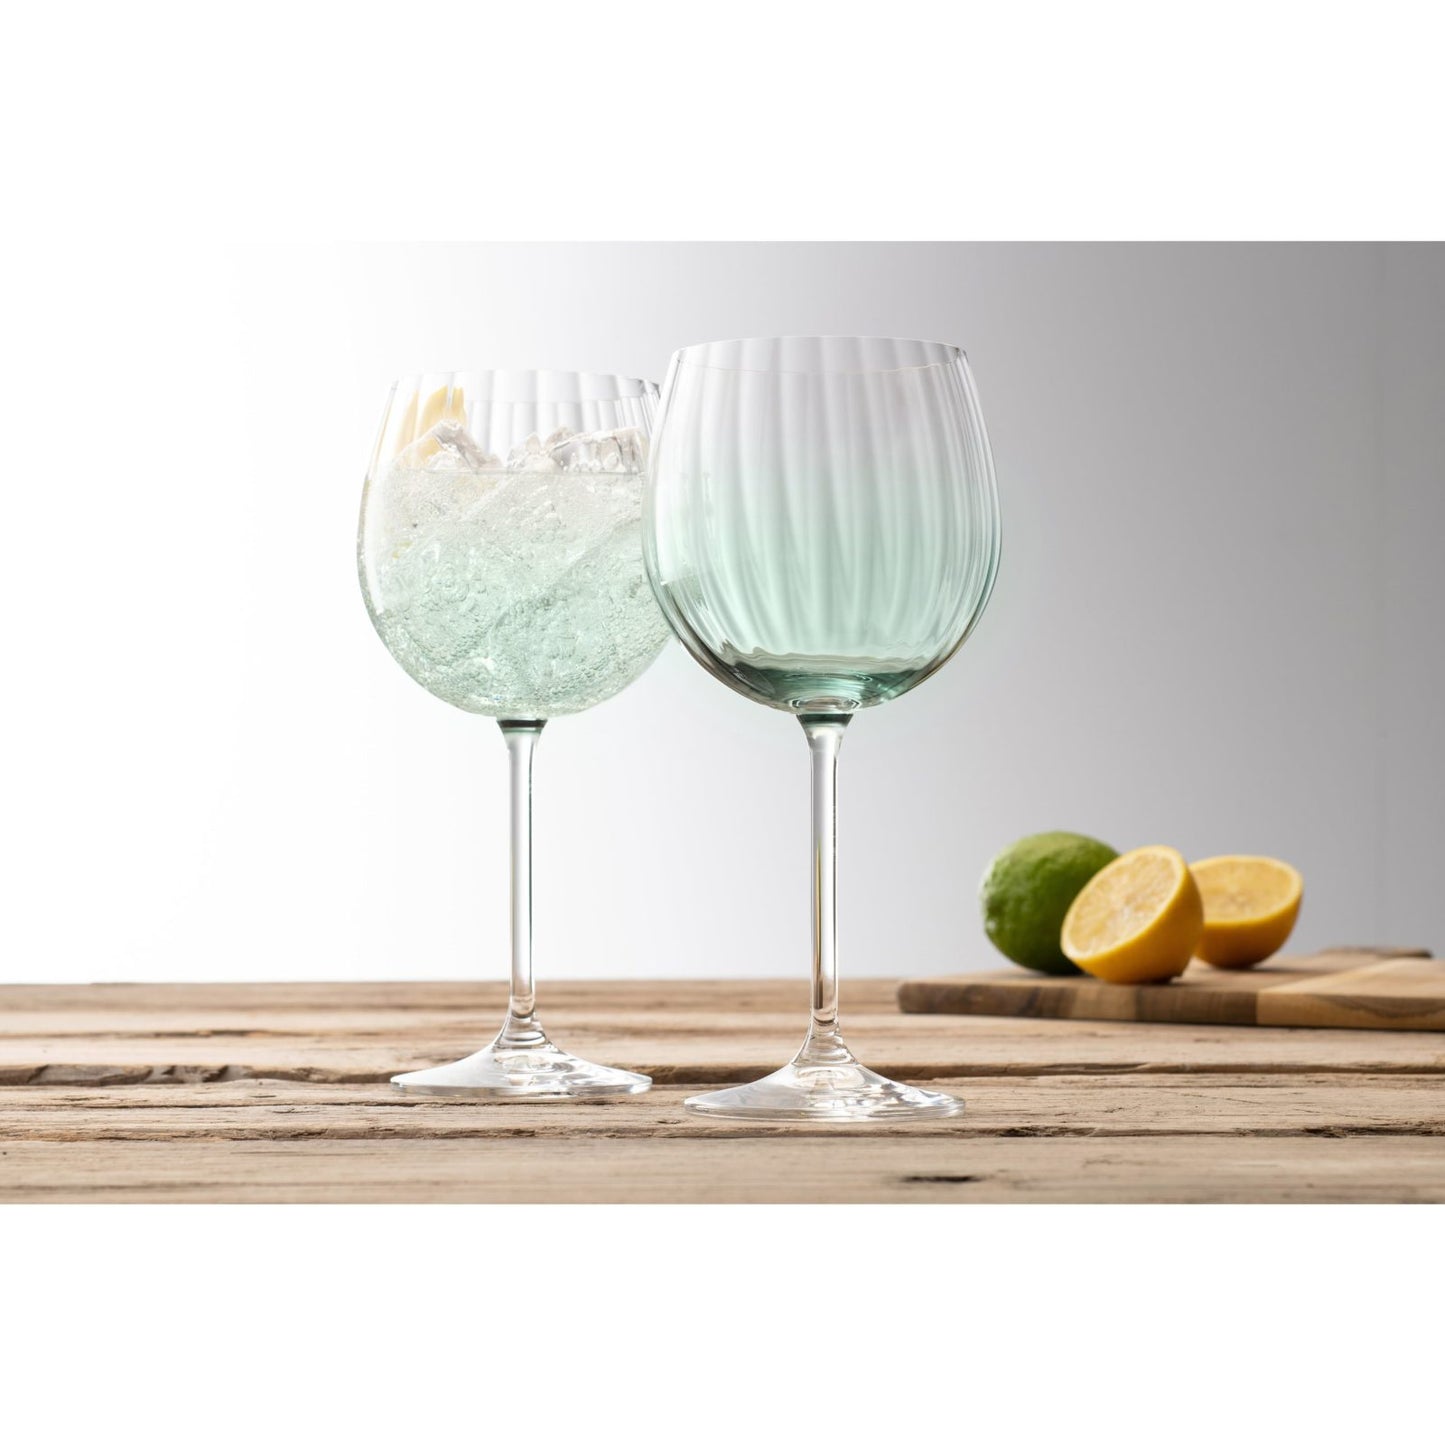 Erne Gin and Tonic glasses set of 2 in Aqua